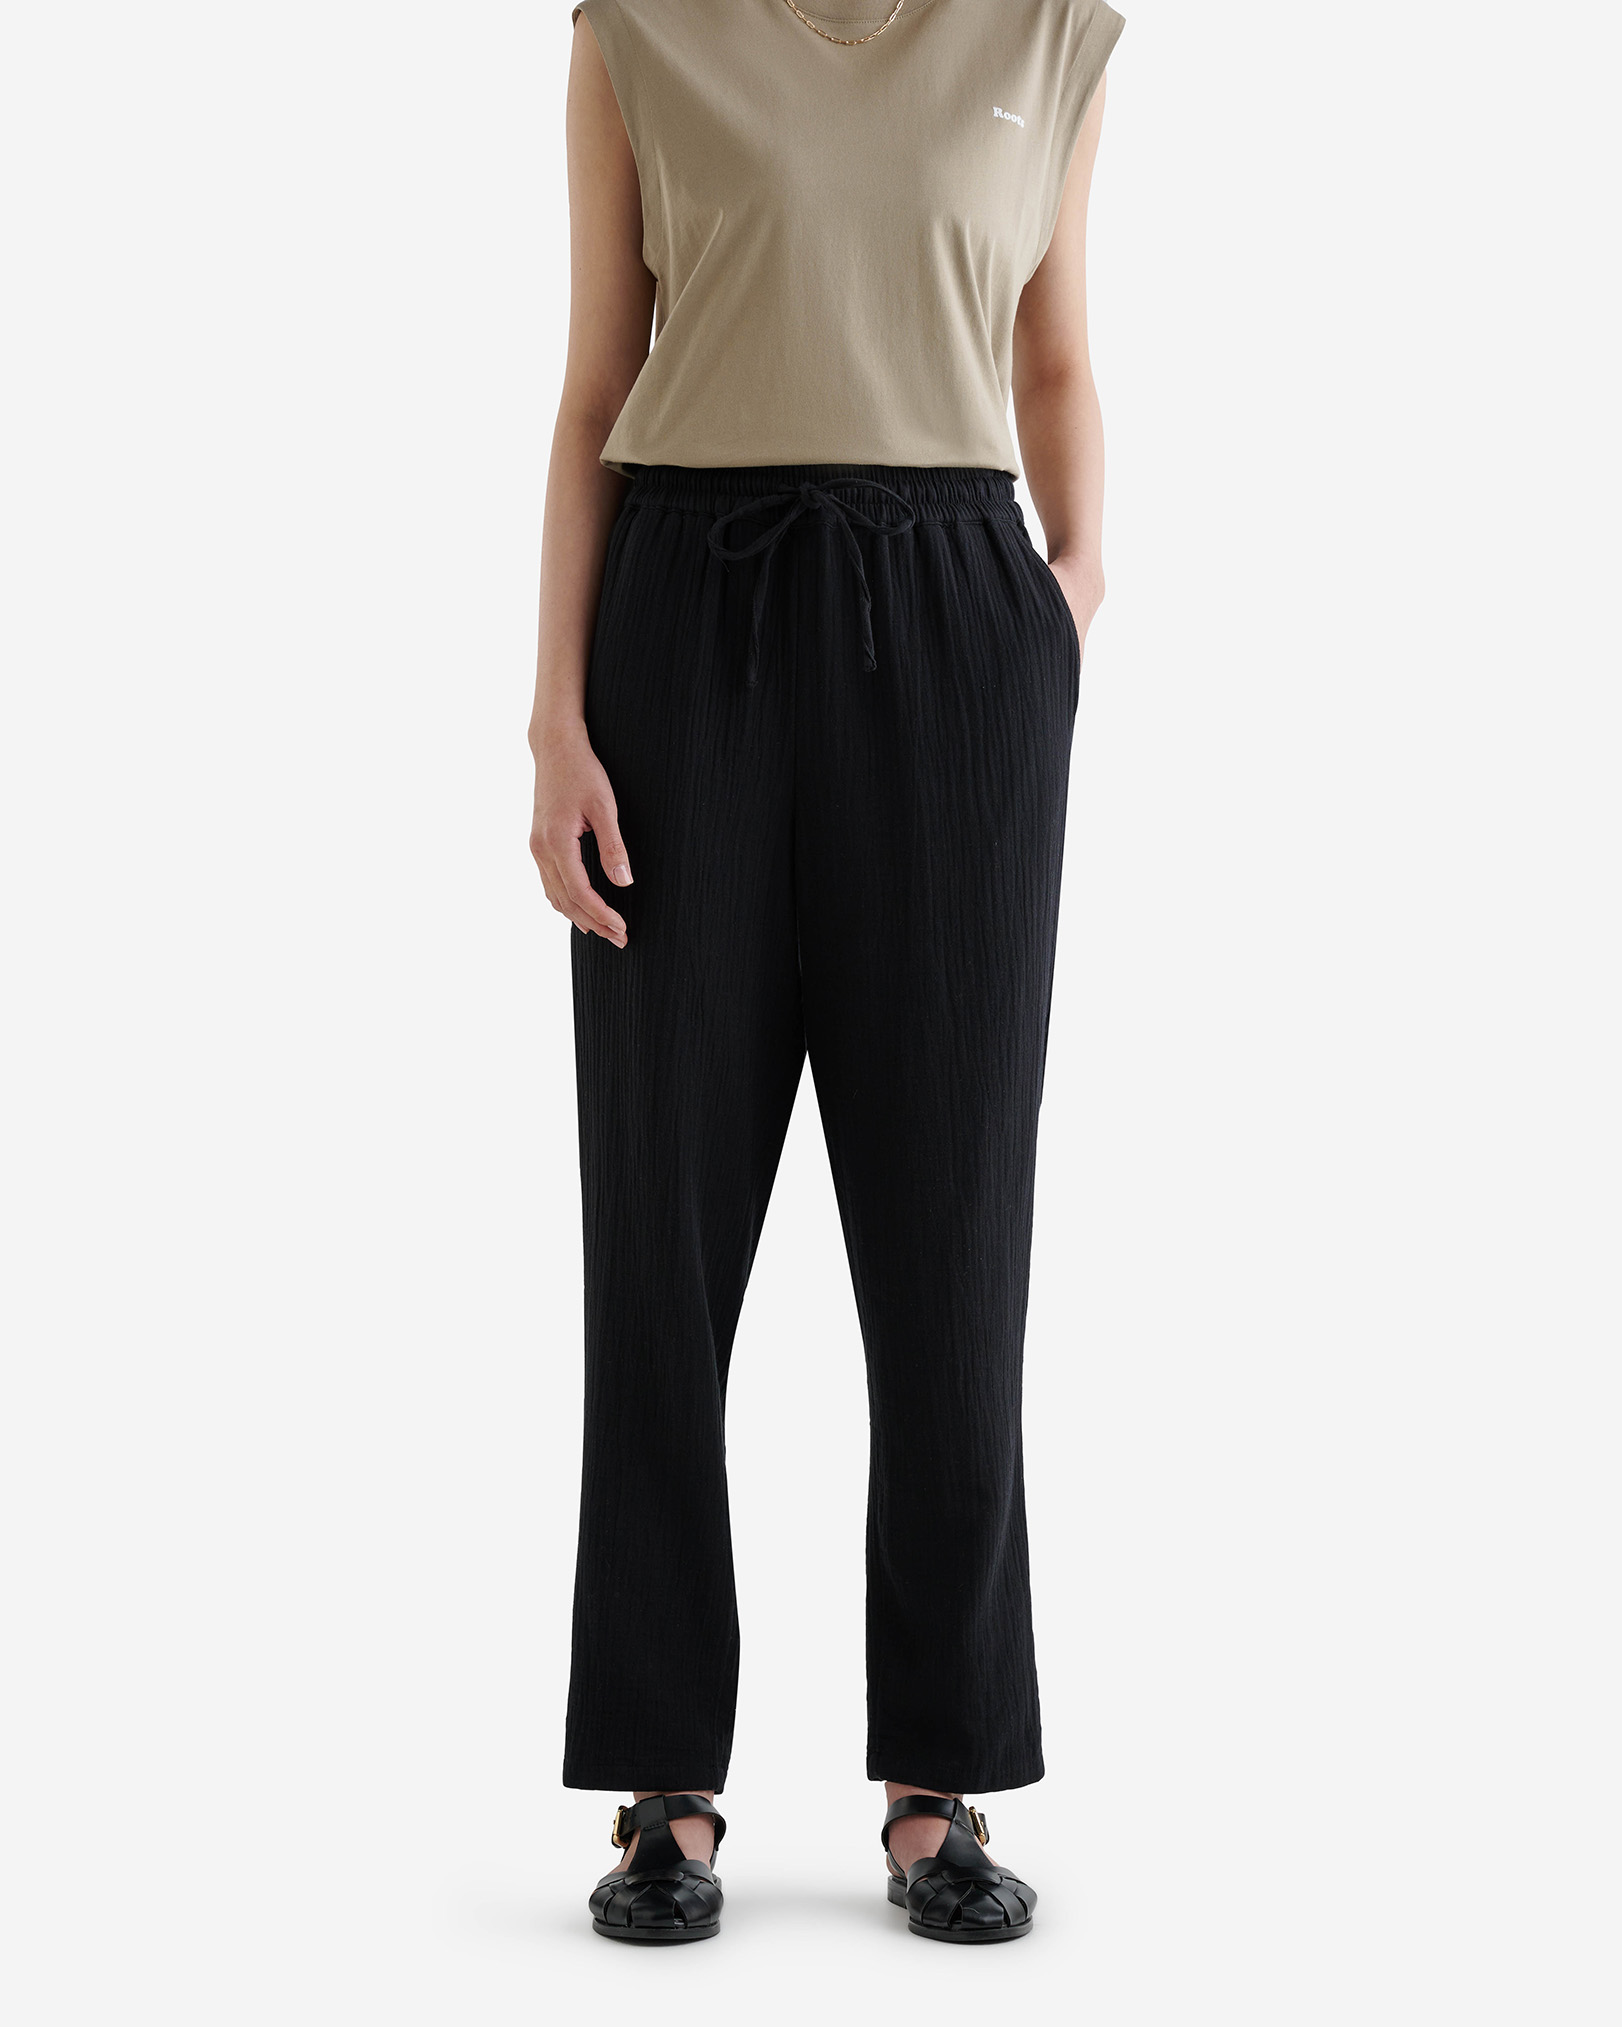 Roots Isla Cotton Gauze Pull On Pant in Black